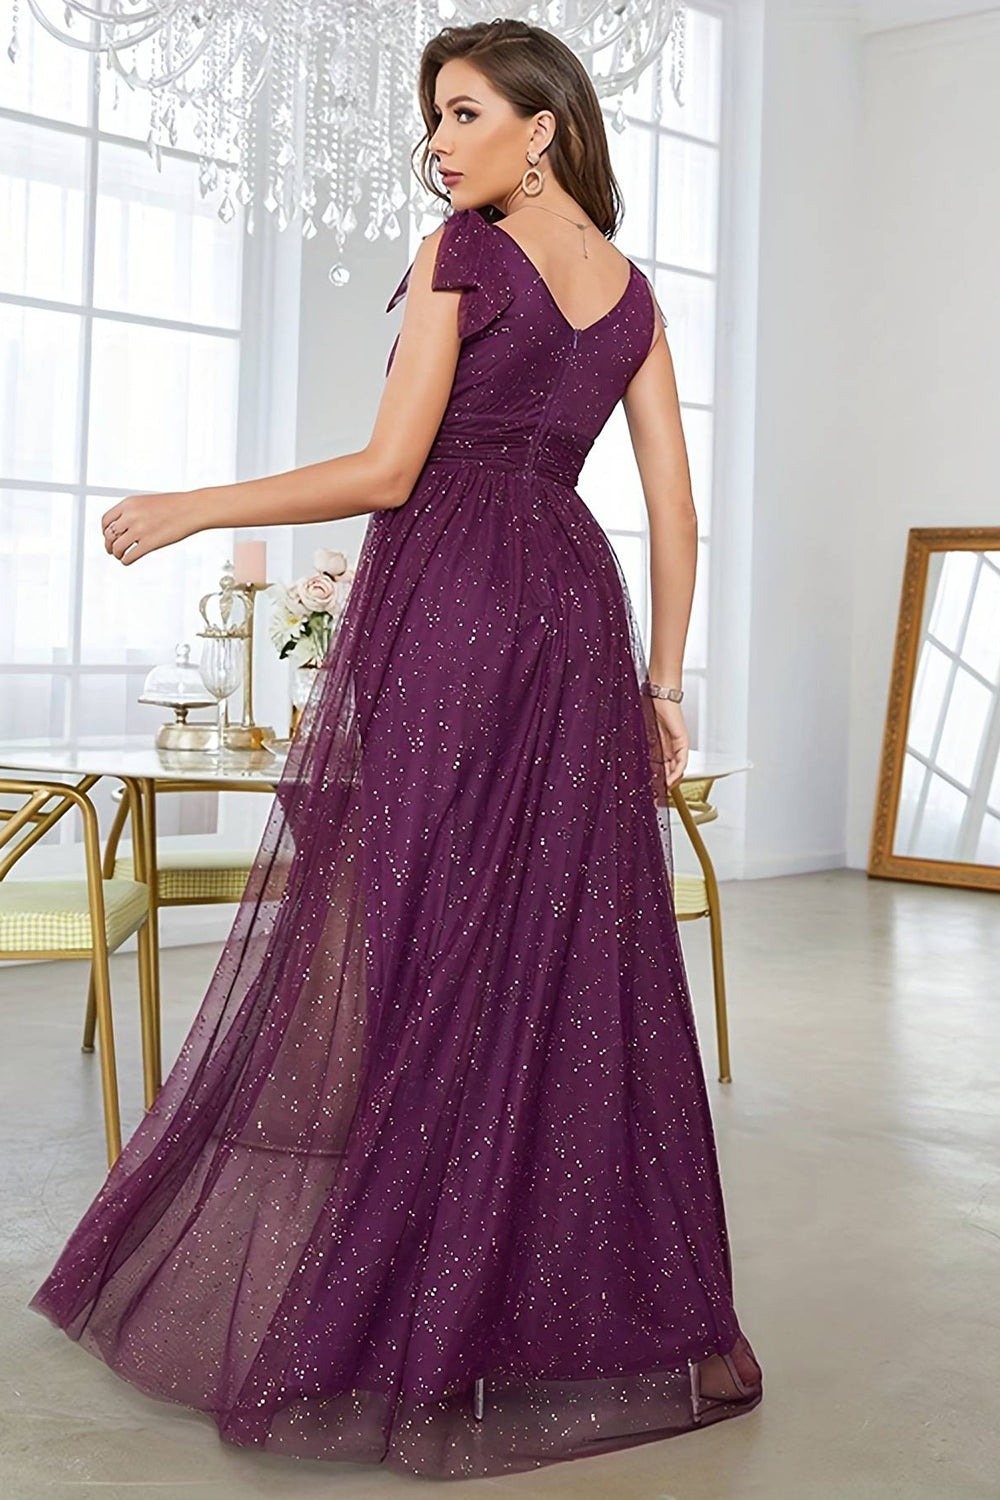 Sparkly Lilac Prom Dresses, Plung Neck Formal Sequins Evening Gown